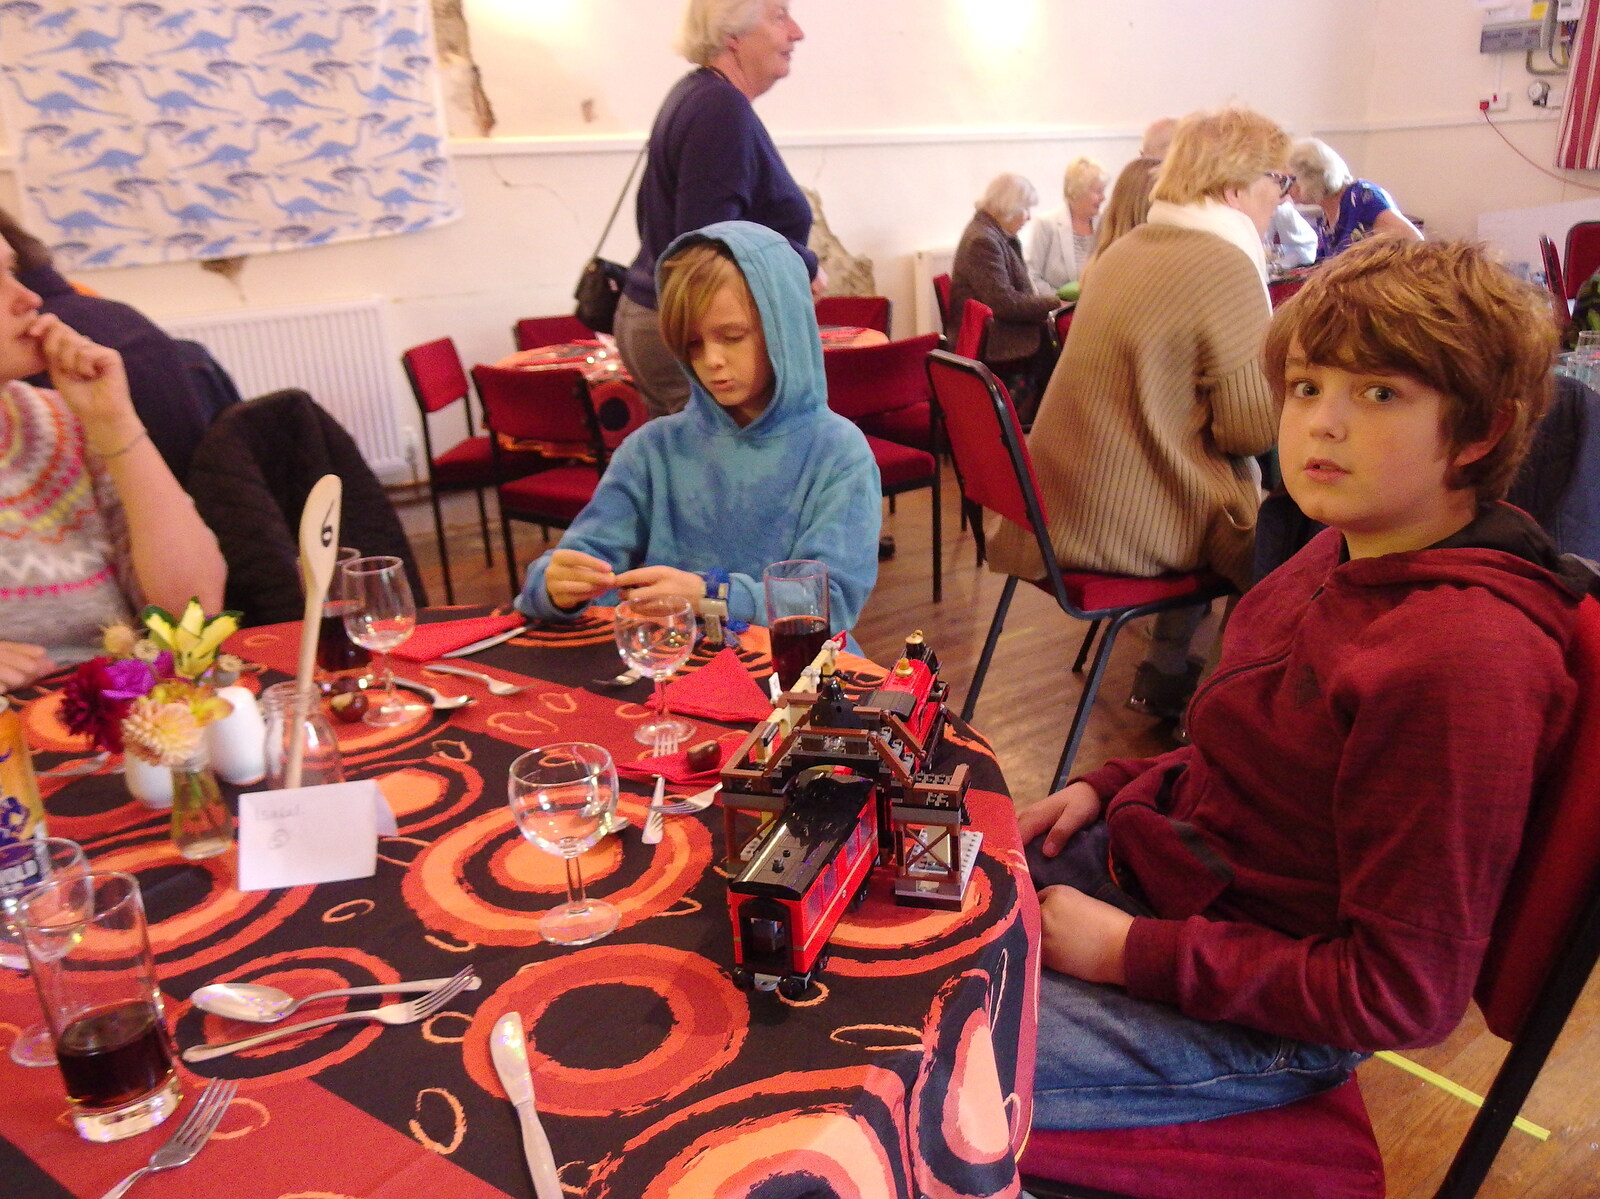 Fred looks up, with his Harry Potter Lego from Sunday Lunch at the Village Hall, Brome, Suffolk - 10th October 2021